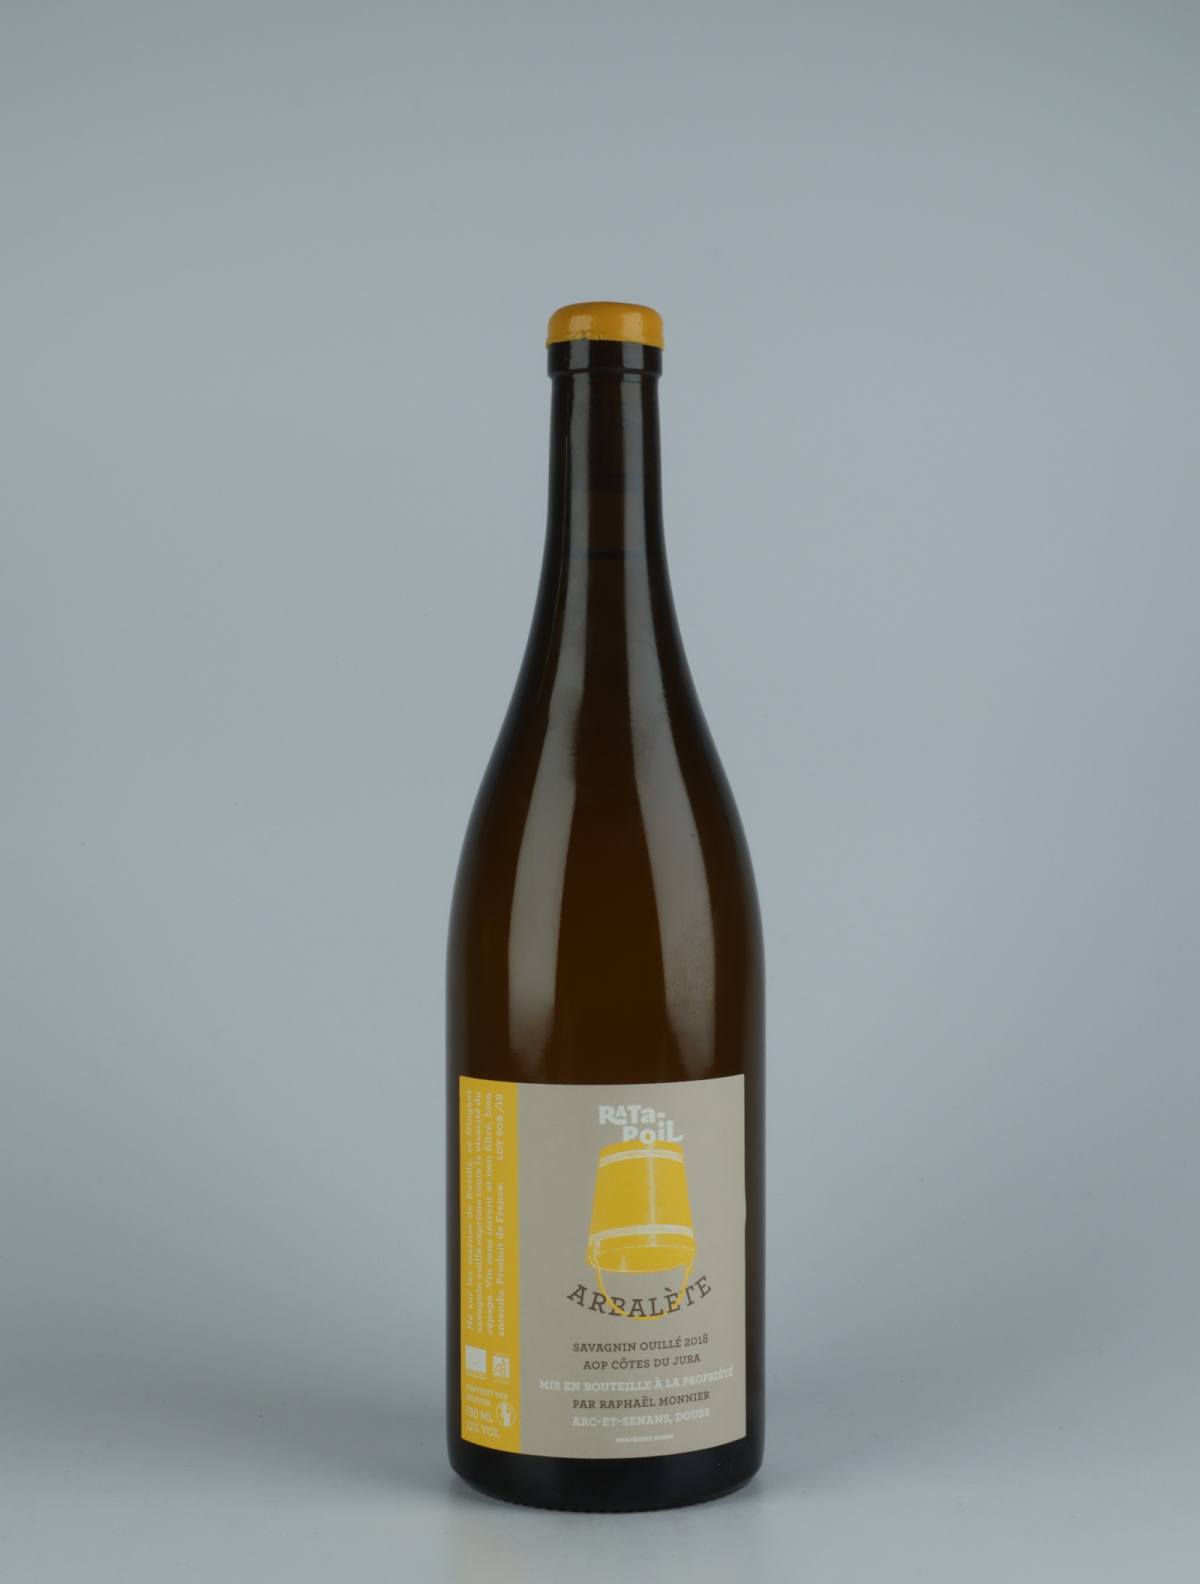 A bottle 2018 Arbalète White wine from Domaine Ratapoil, Jura in France